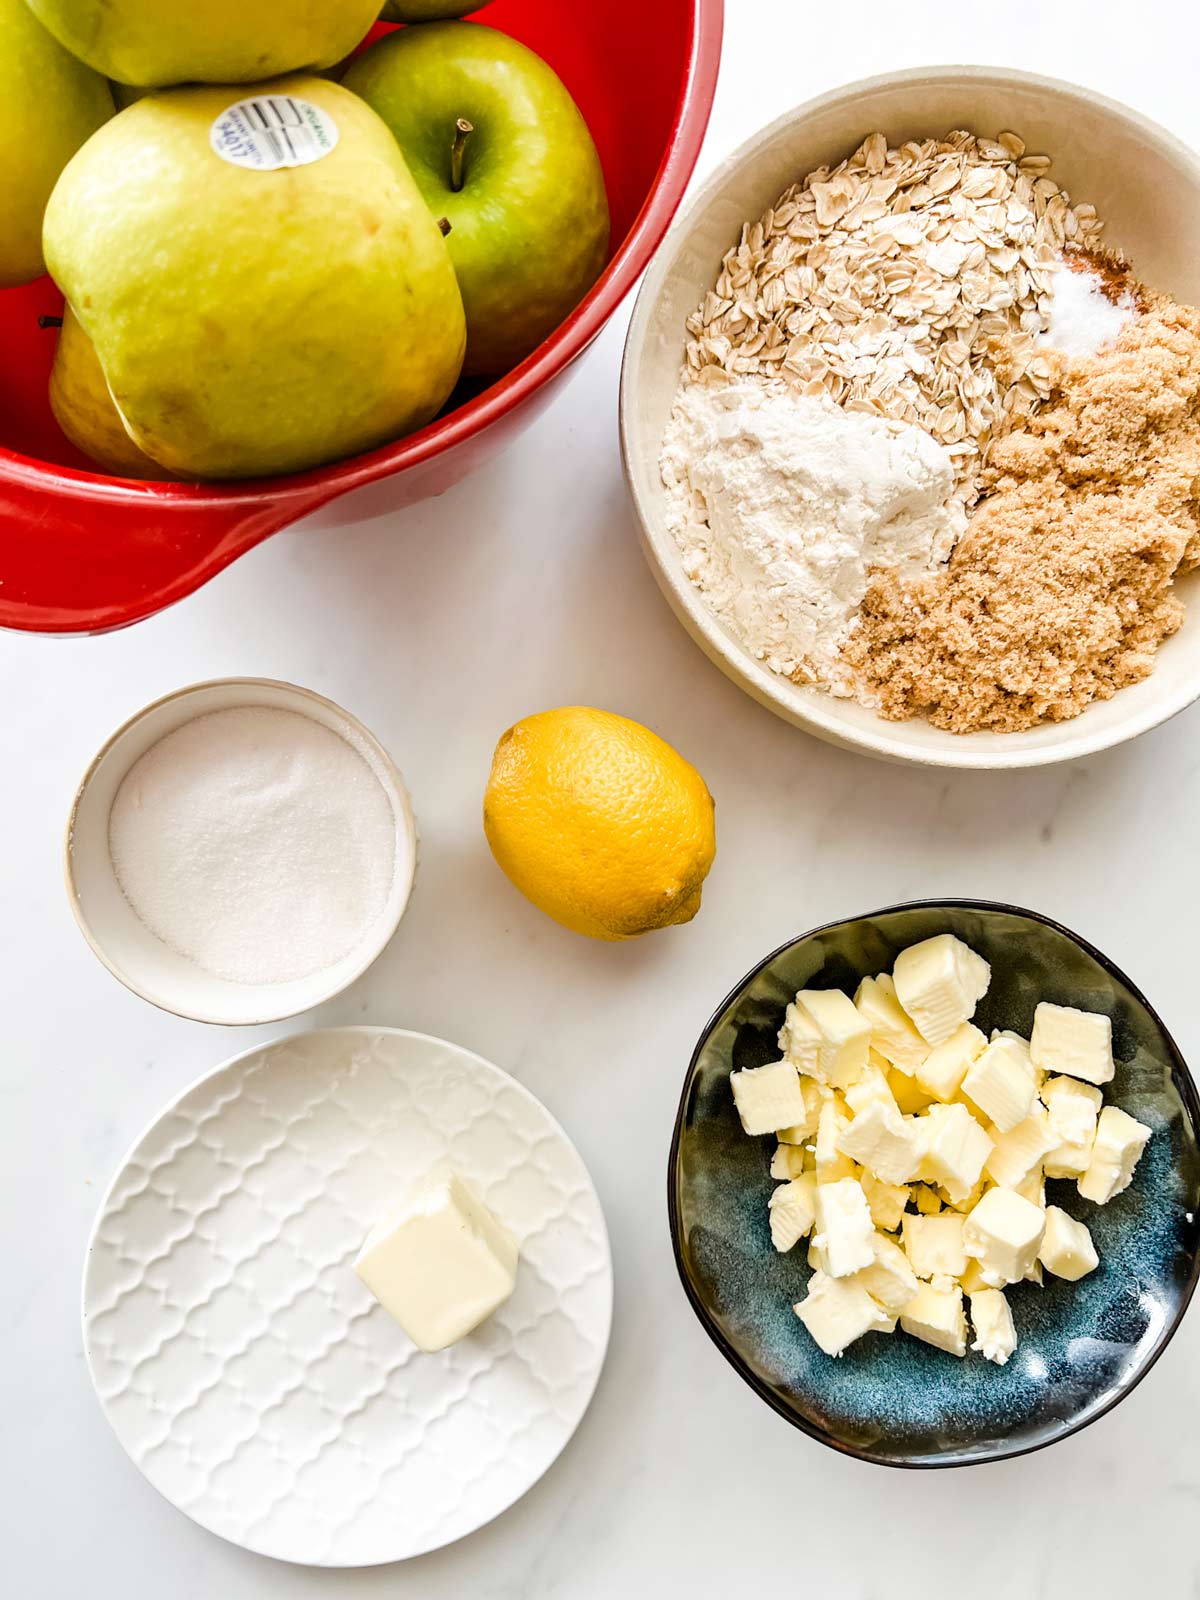 Overhead photo of apples, flour, oats, brown sugar, butter, lemon, and white sugar in prep bowls.